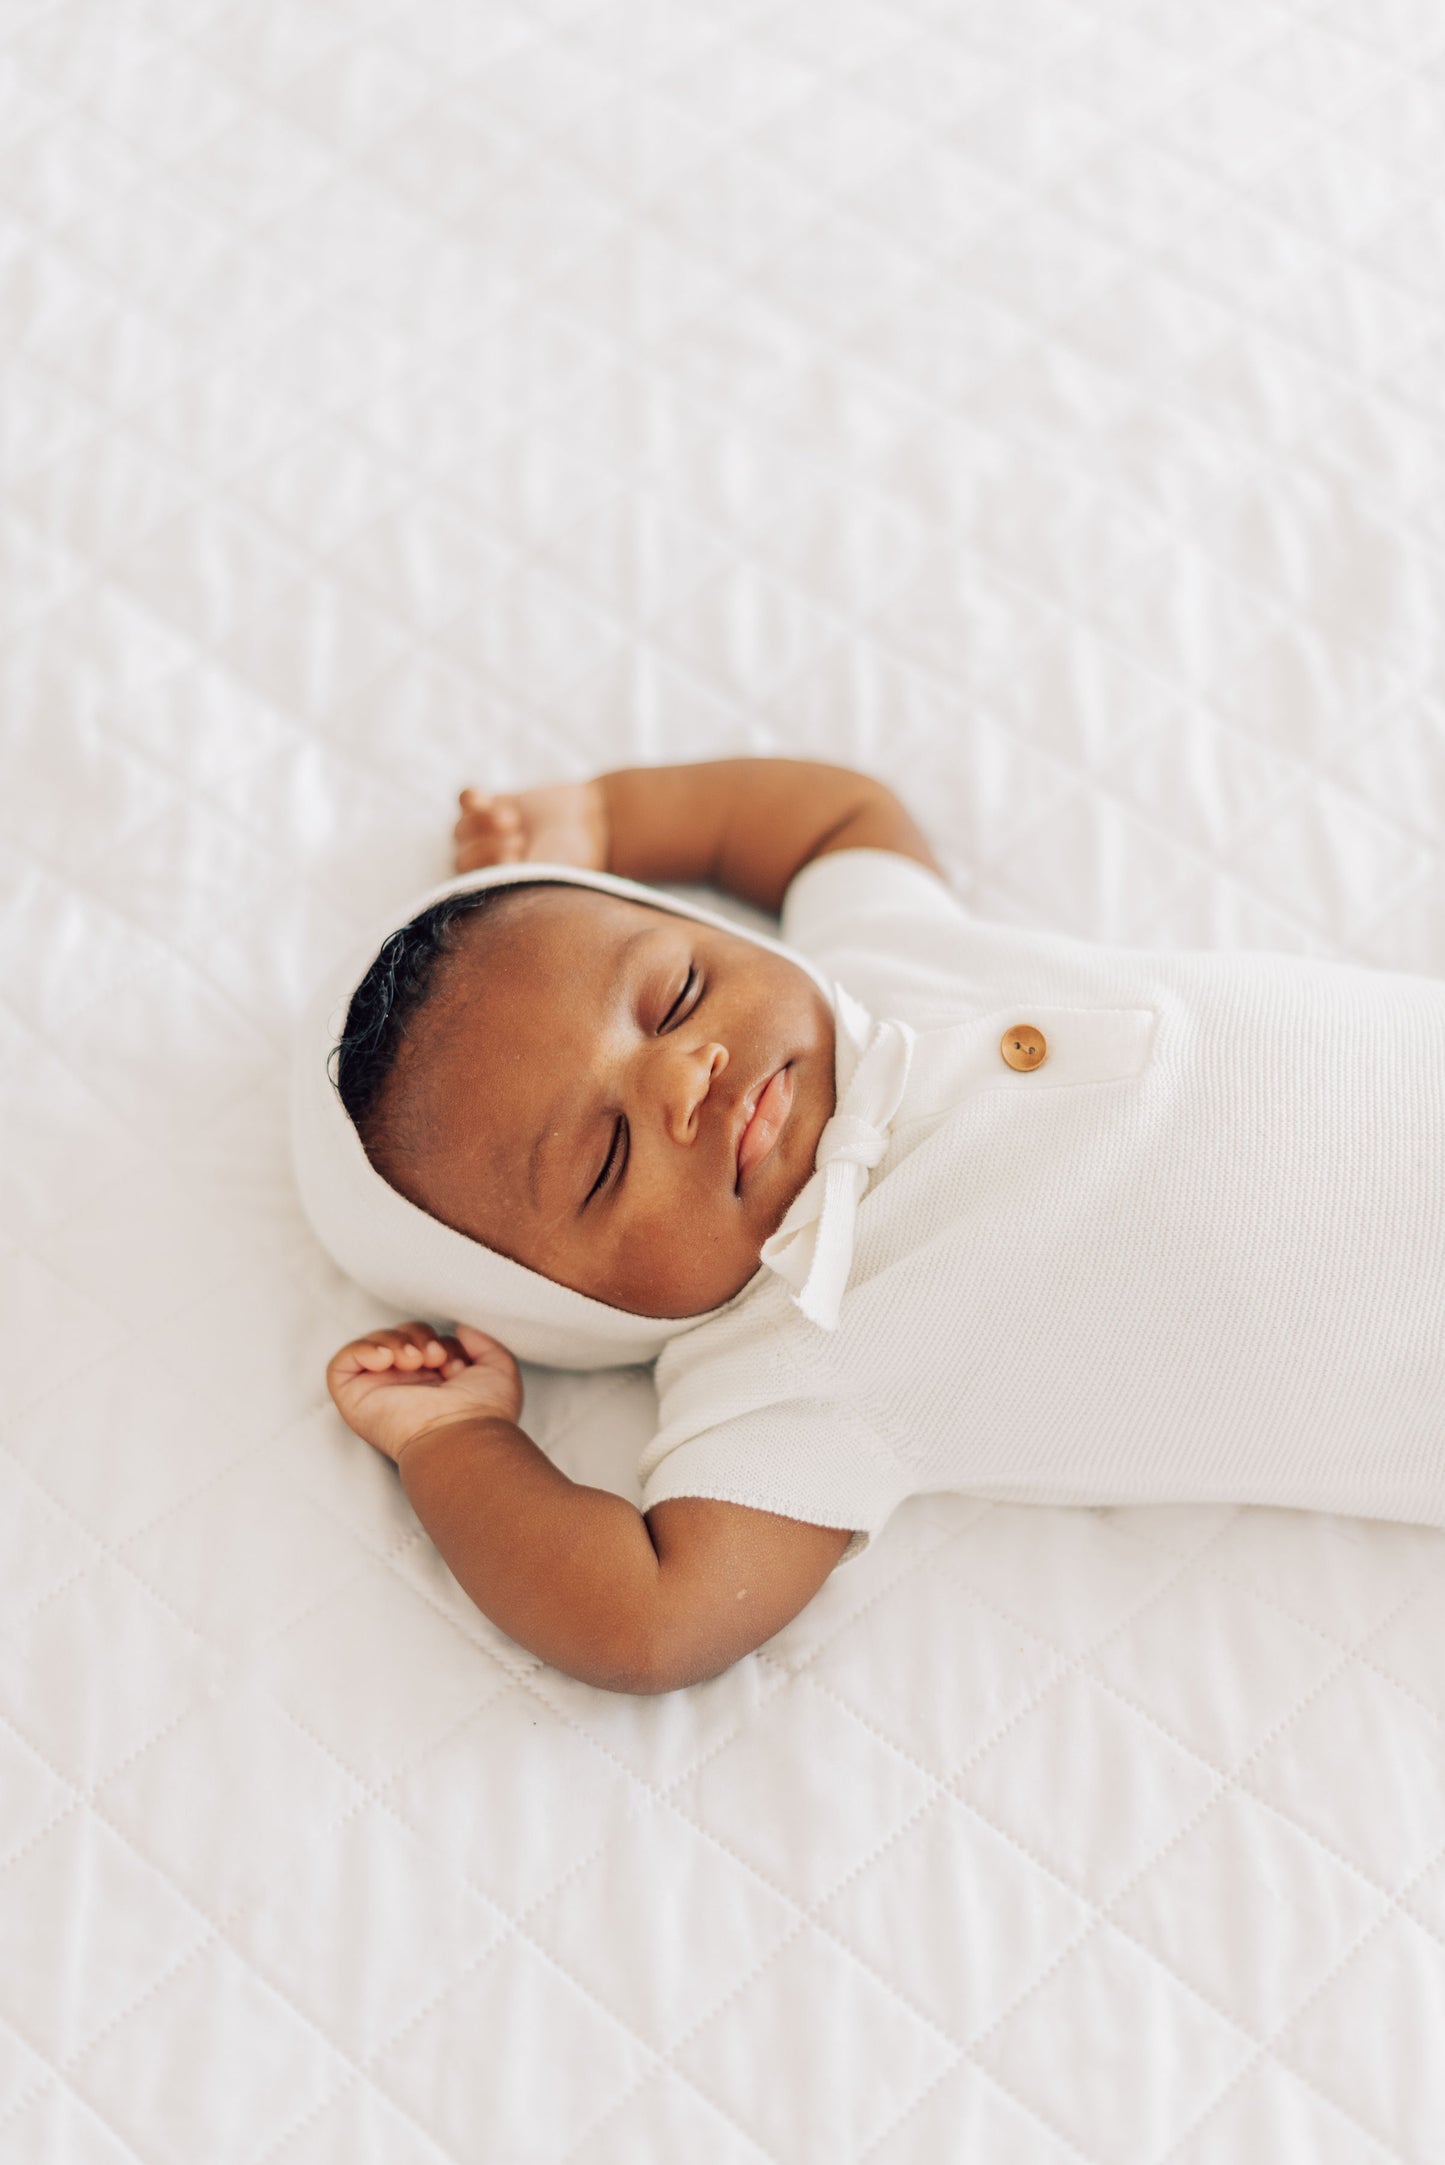 Baby laying on white comforter in white bonnet and white outfit with brown buttons.